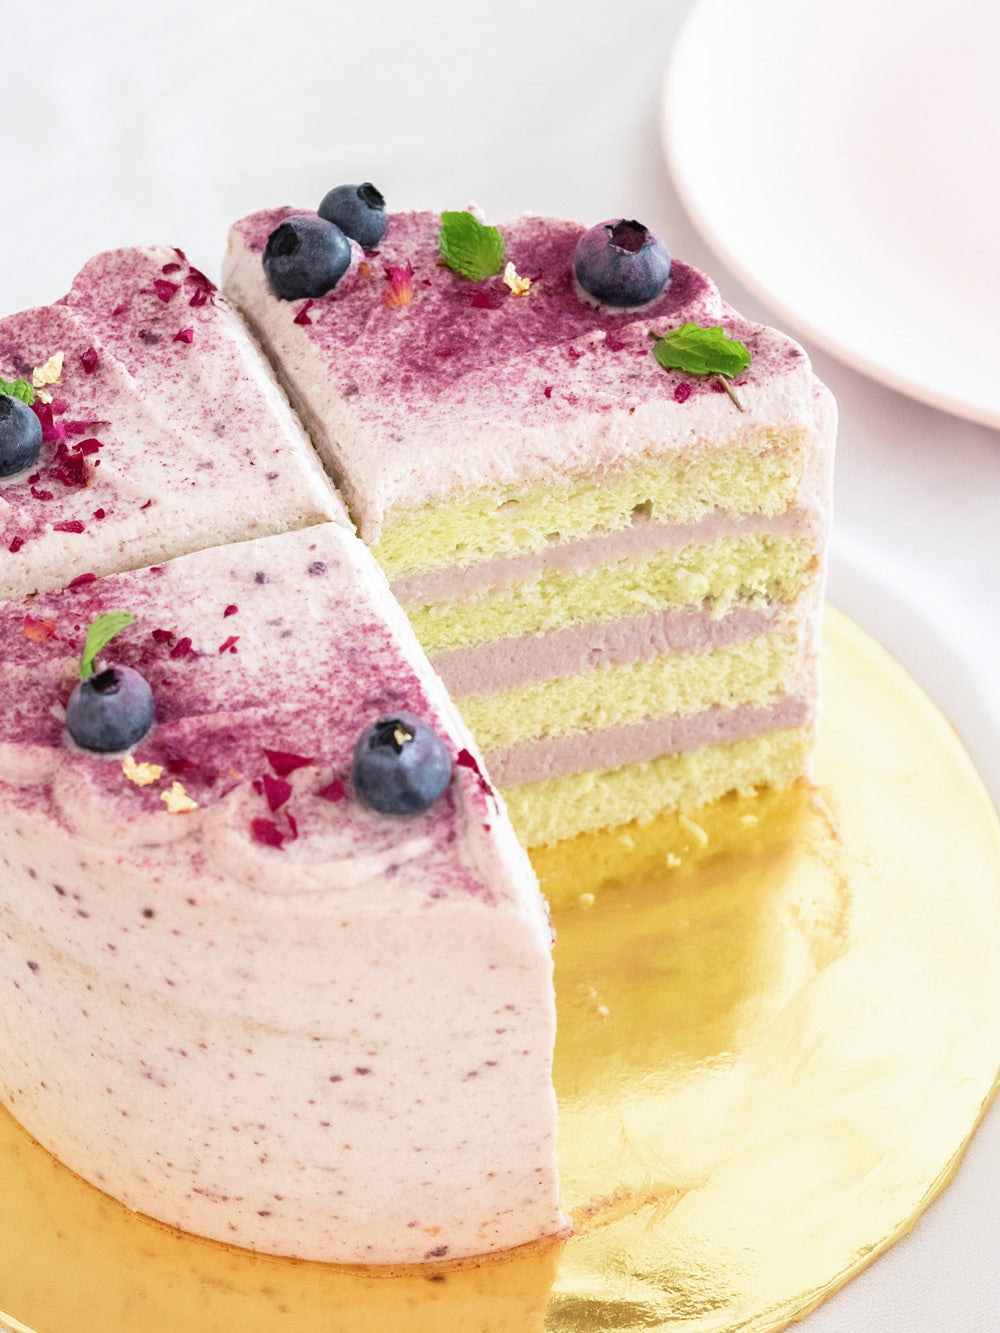 Pandan sponge cake with pure taro filling & sweet potato fresh cream decorated with blueberries and fresh mint leaves